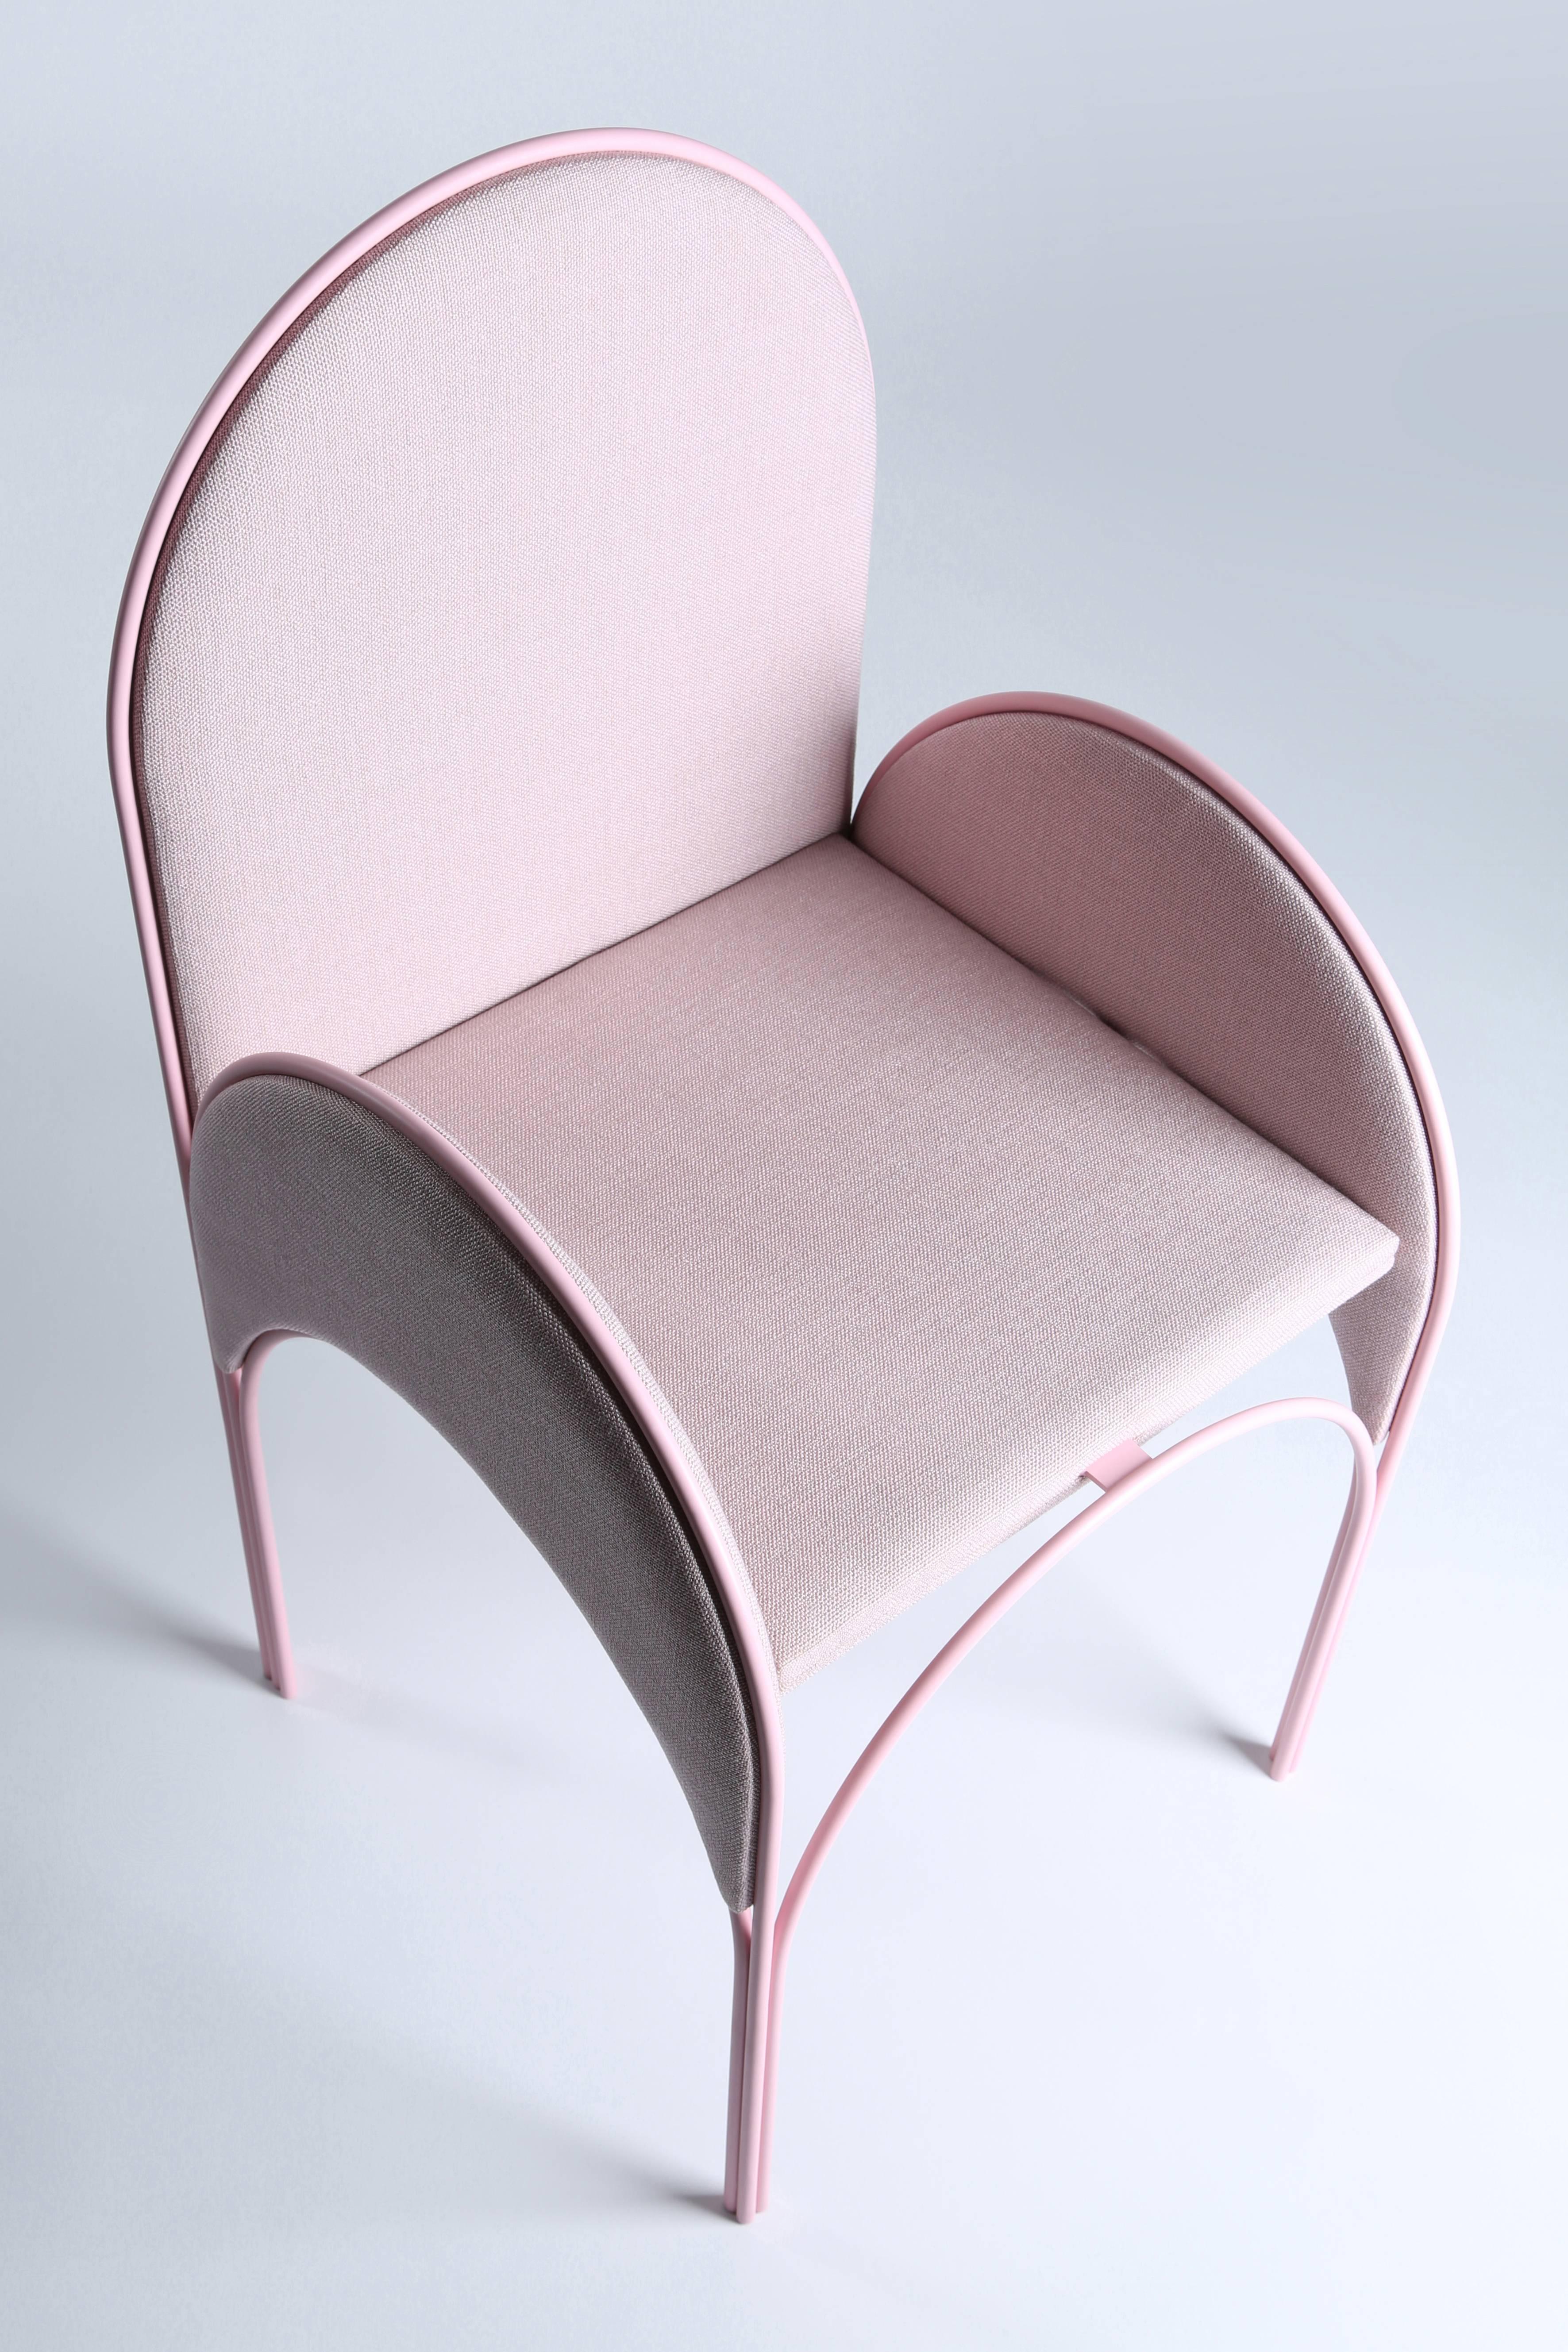 Lebanese Hawa Beirut Fully Upholstered Pink Chair by Richard Yasmine For Sale